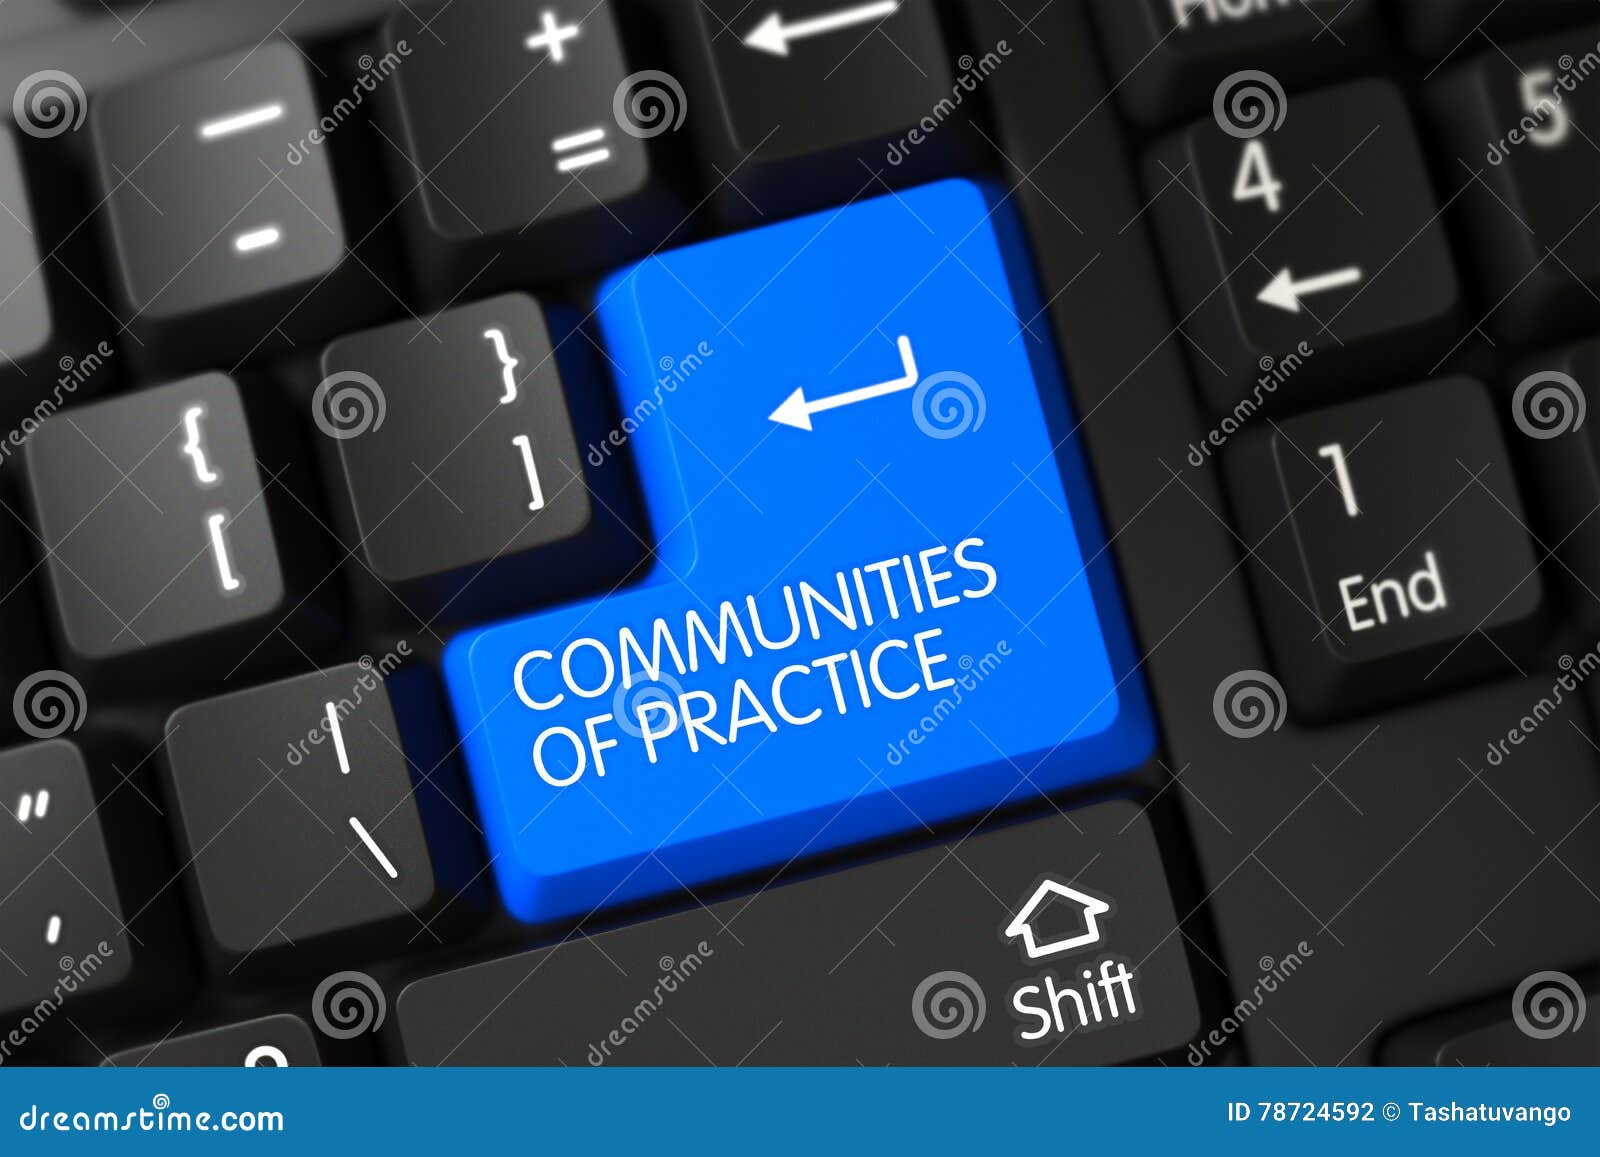 keyboard with blue button - communities of practice. 3d.